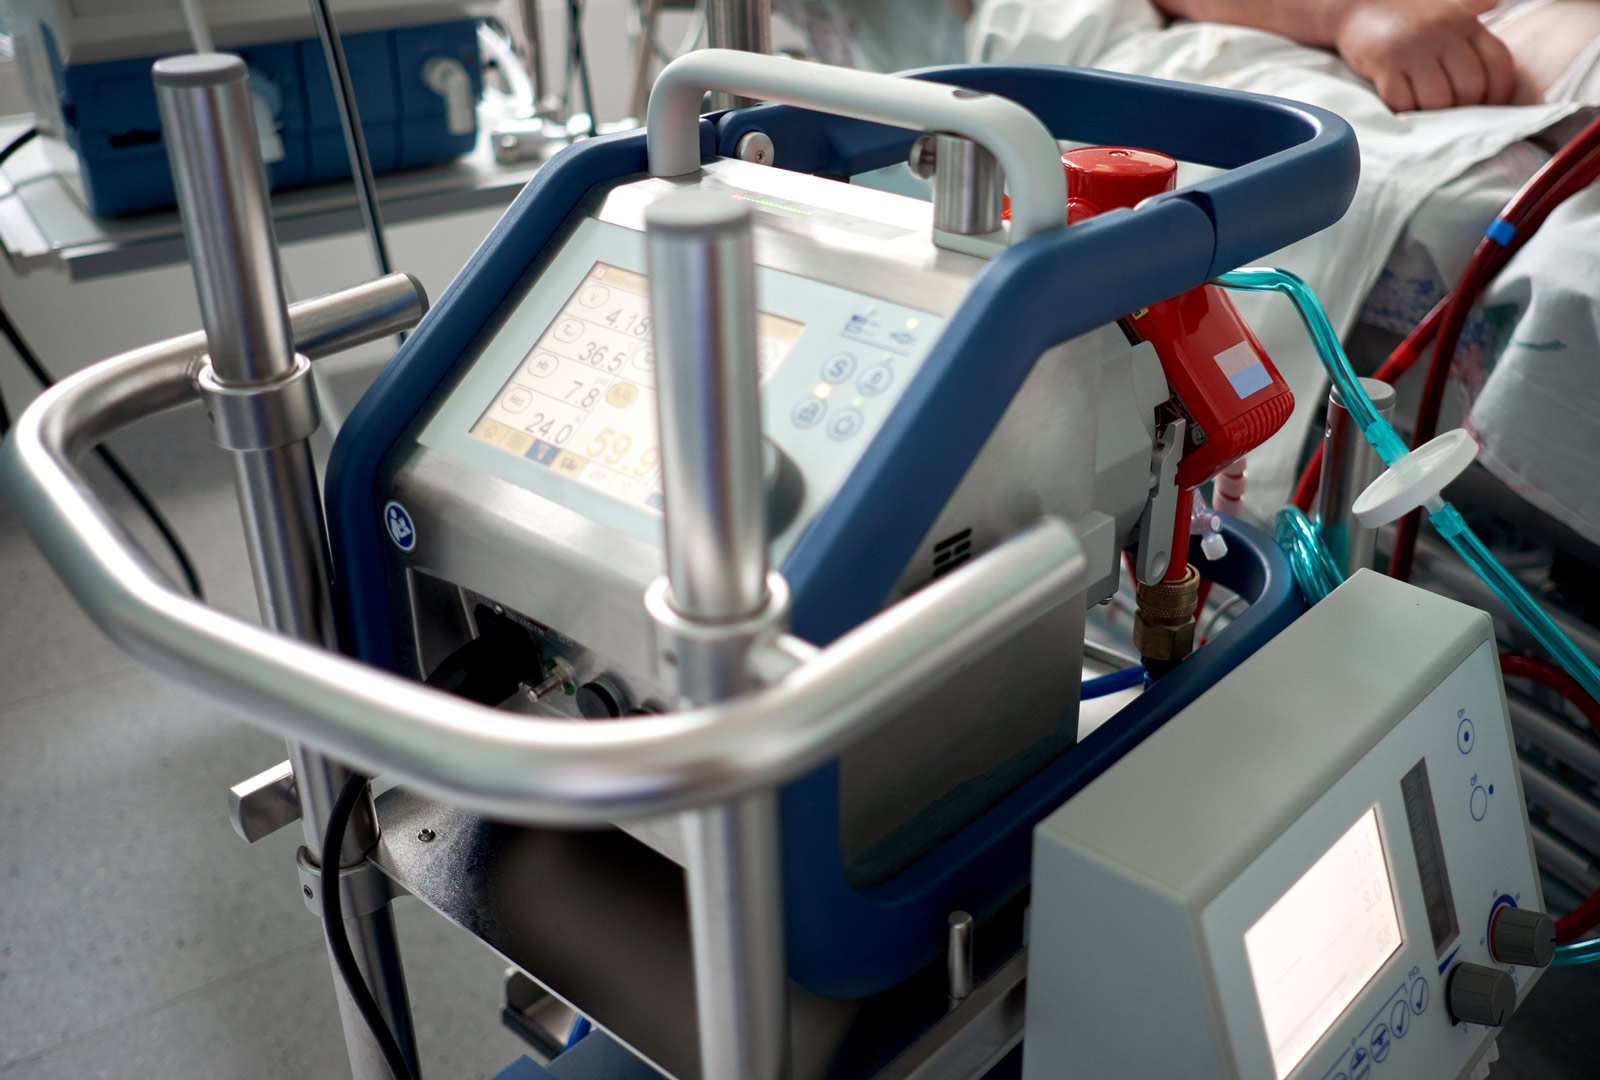 Extracorporeal Membrane Oxygenation Device in Hospital